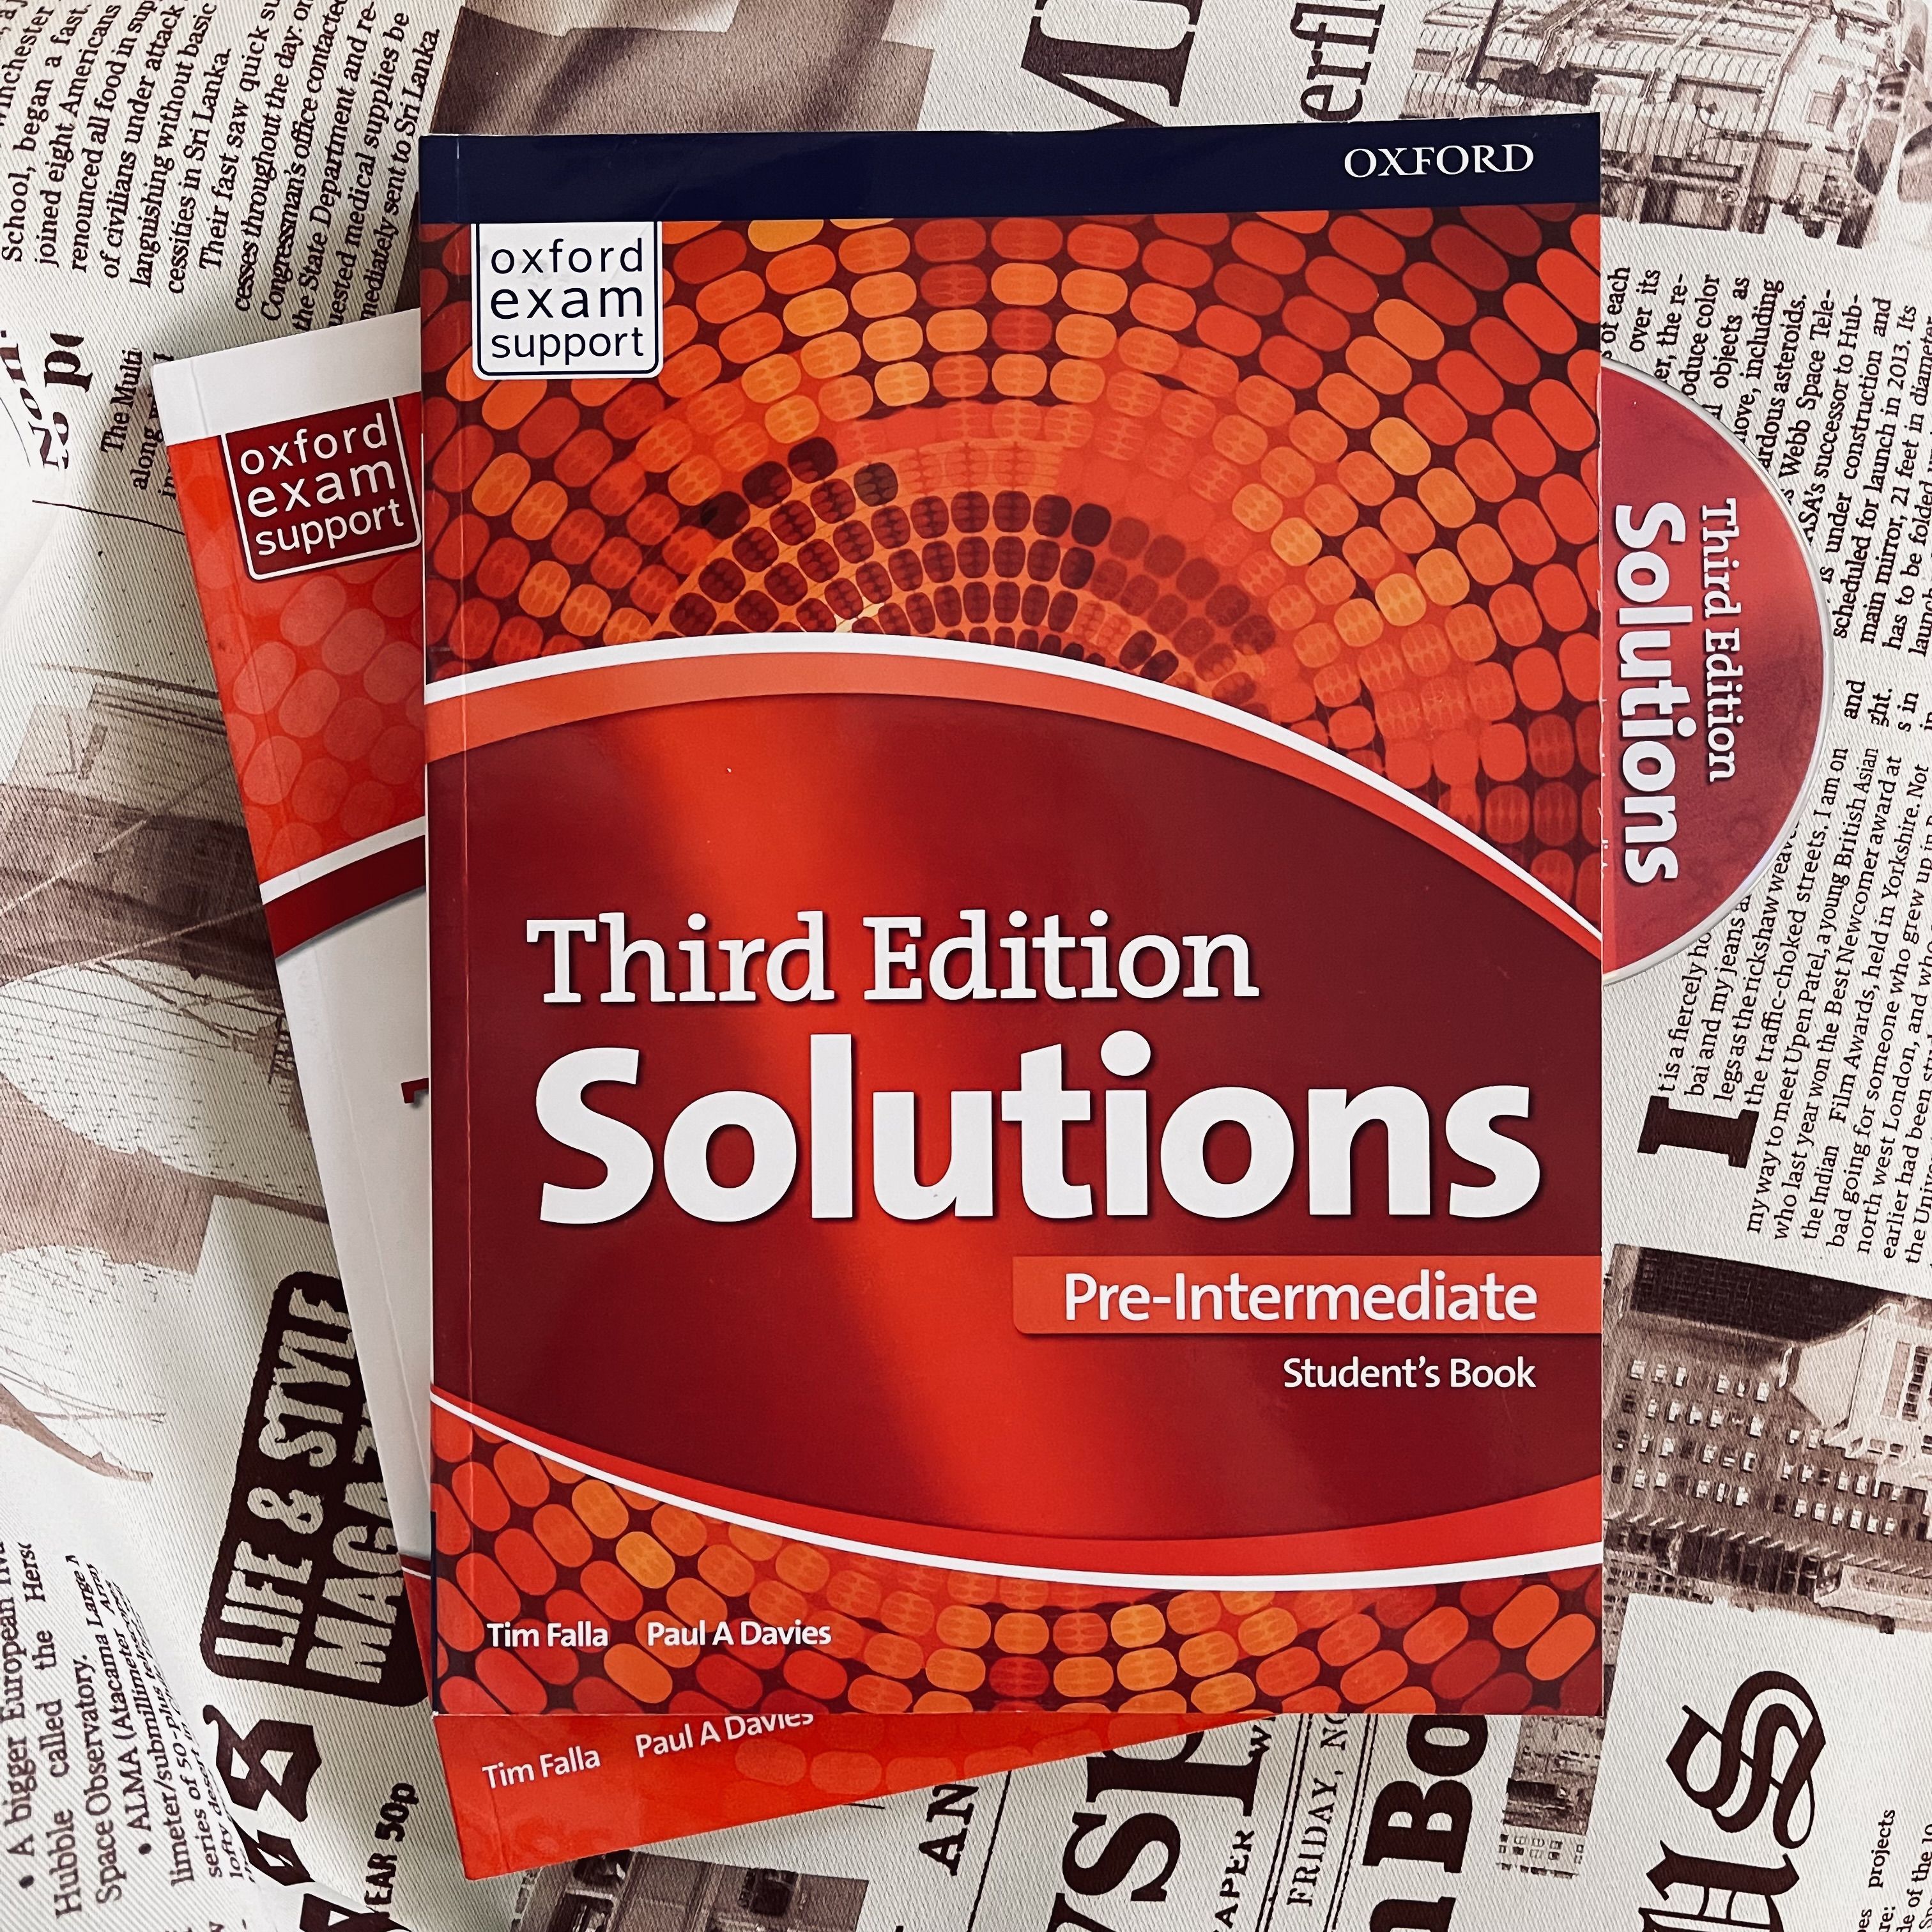 Solutions pre intermediate 3rd edition students book. Third Edition solutions. Solutions: pre-Intermediate. Solutions third Edition 7 класс. Solutions pre-Intermediate 3rd Edition.